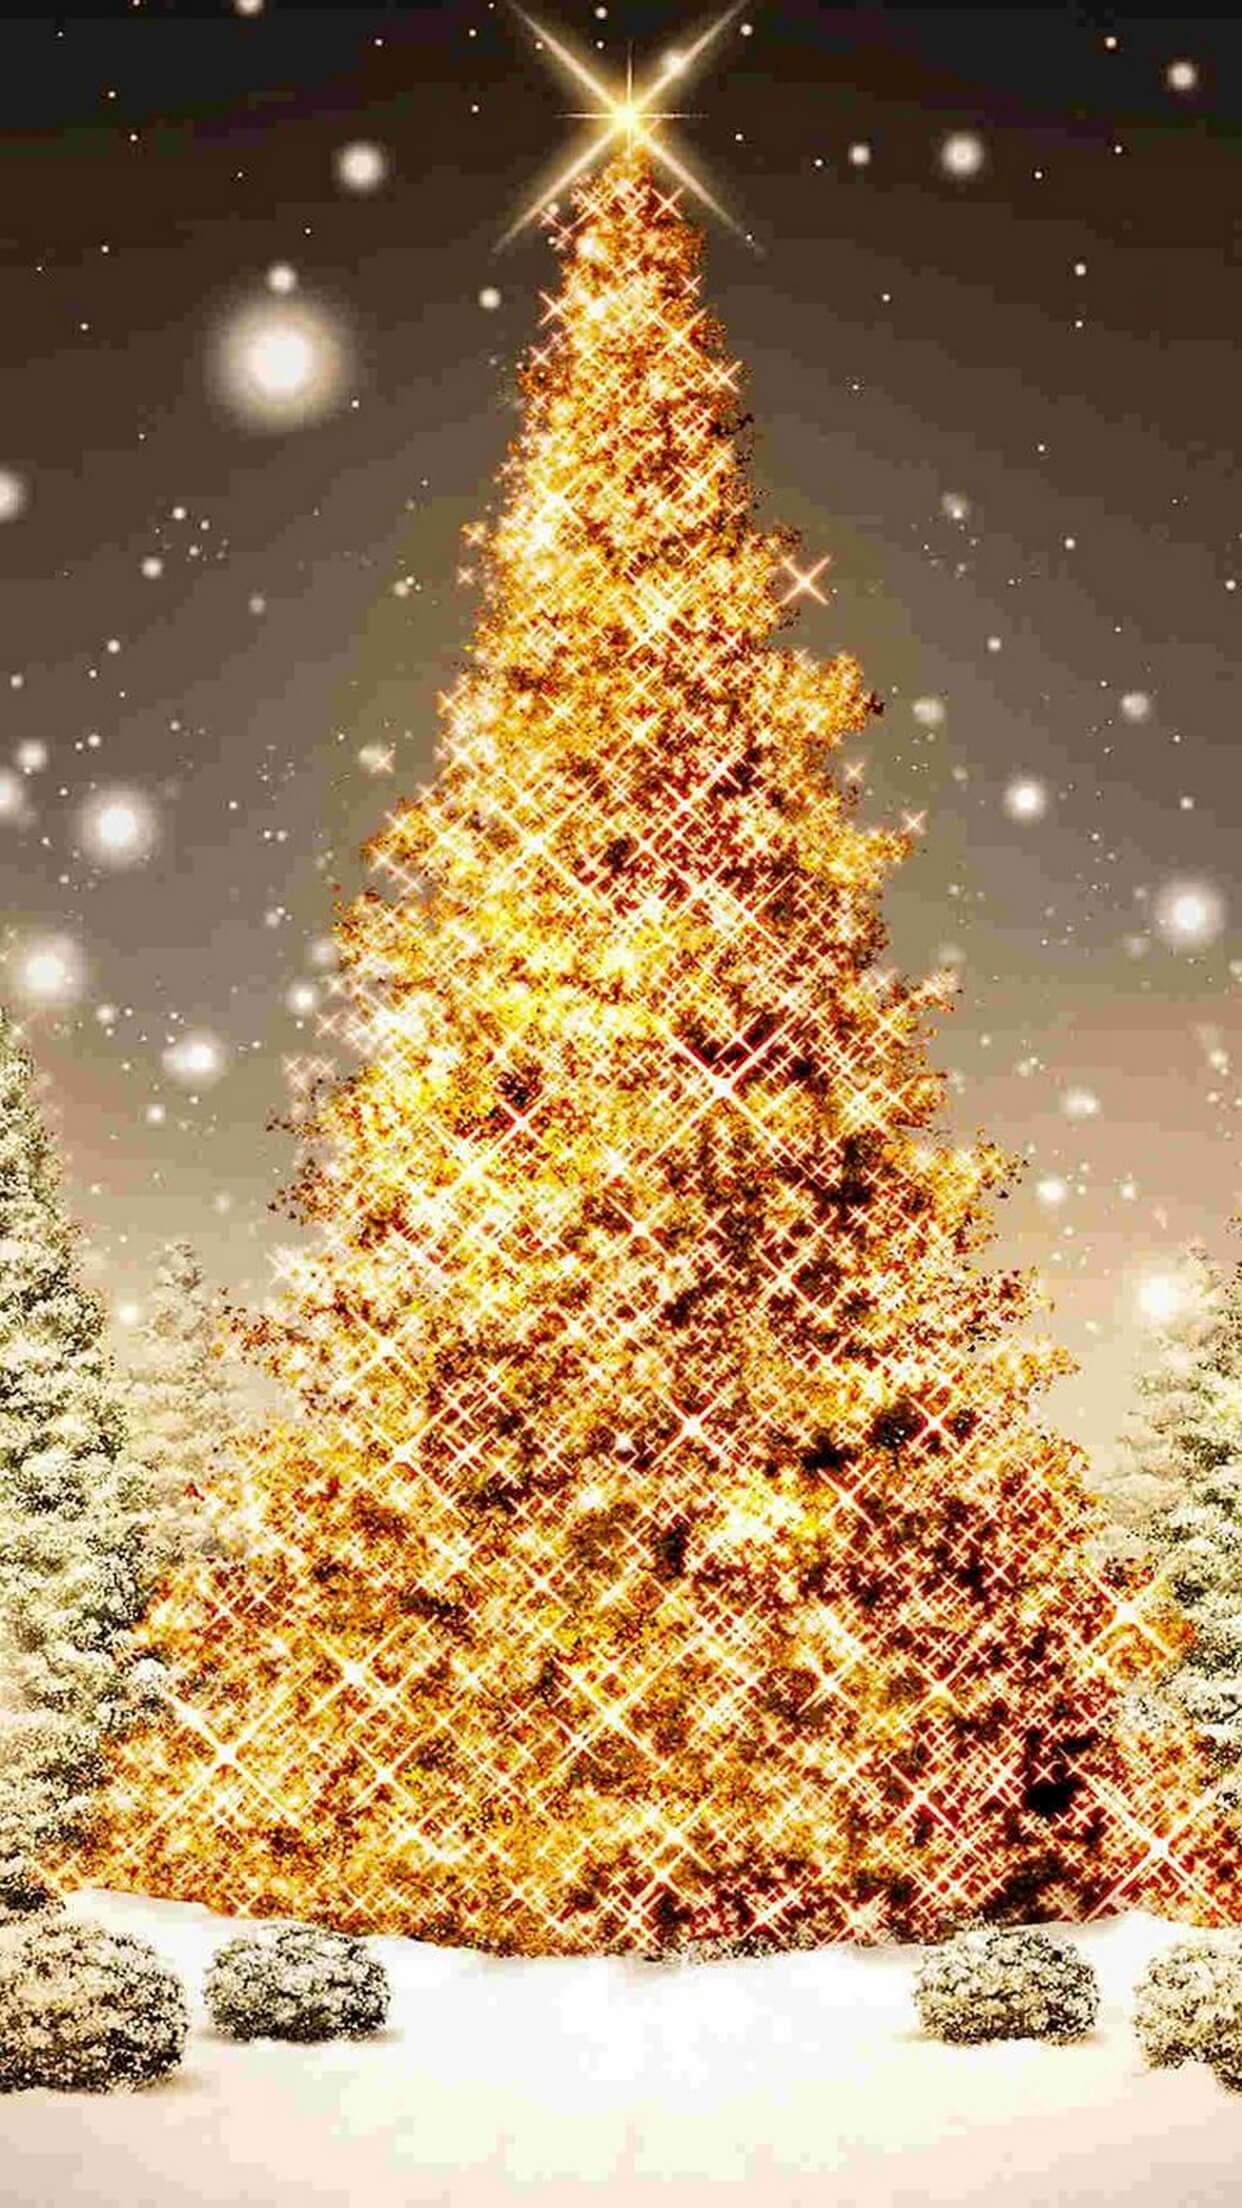 Sfondi Natalizi Iphone 5c.Try To Use 32 Christmas Wallpapers For Iphones